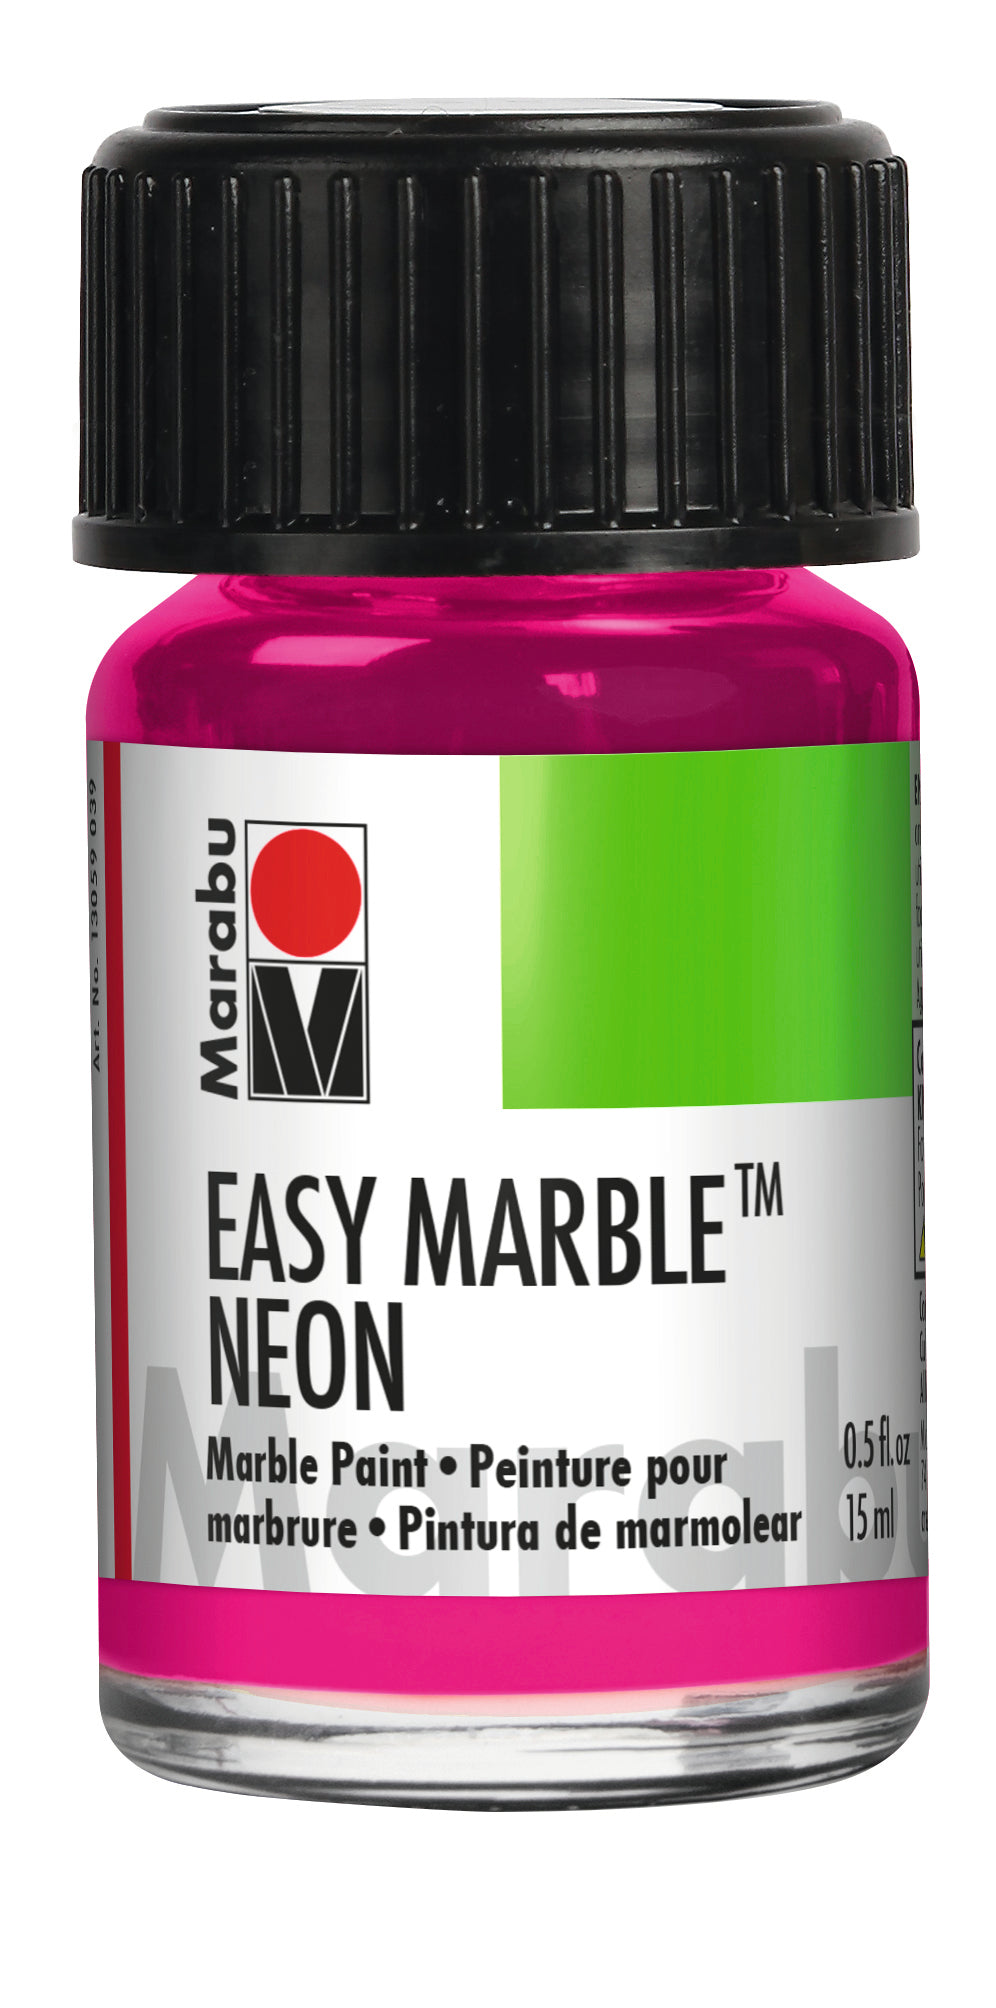 Neon Pink 334 - Easy Marble